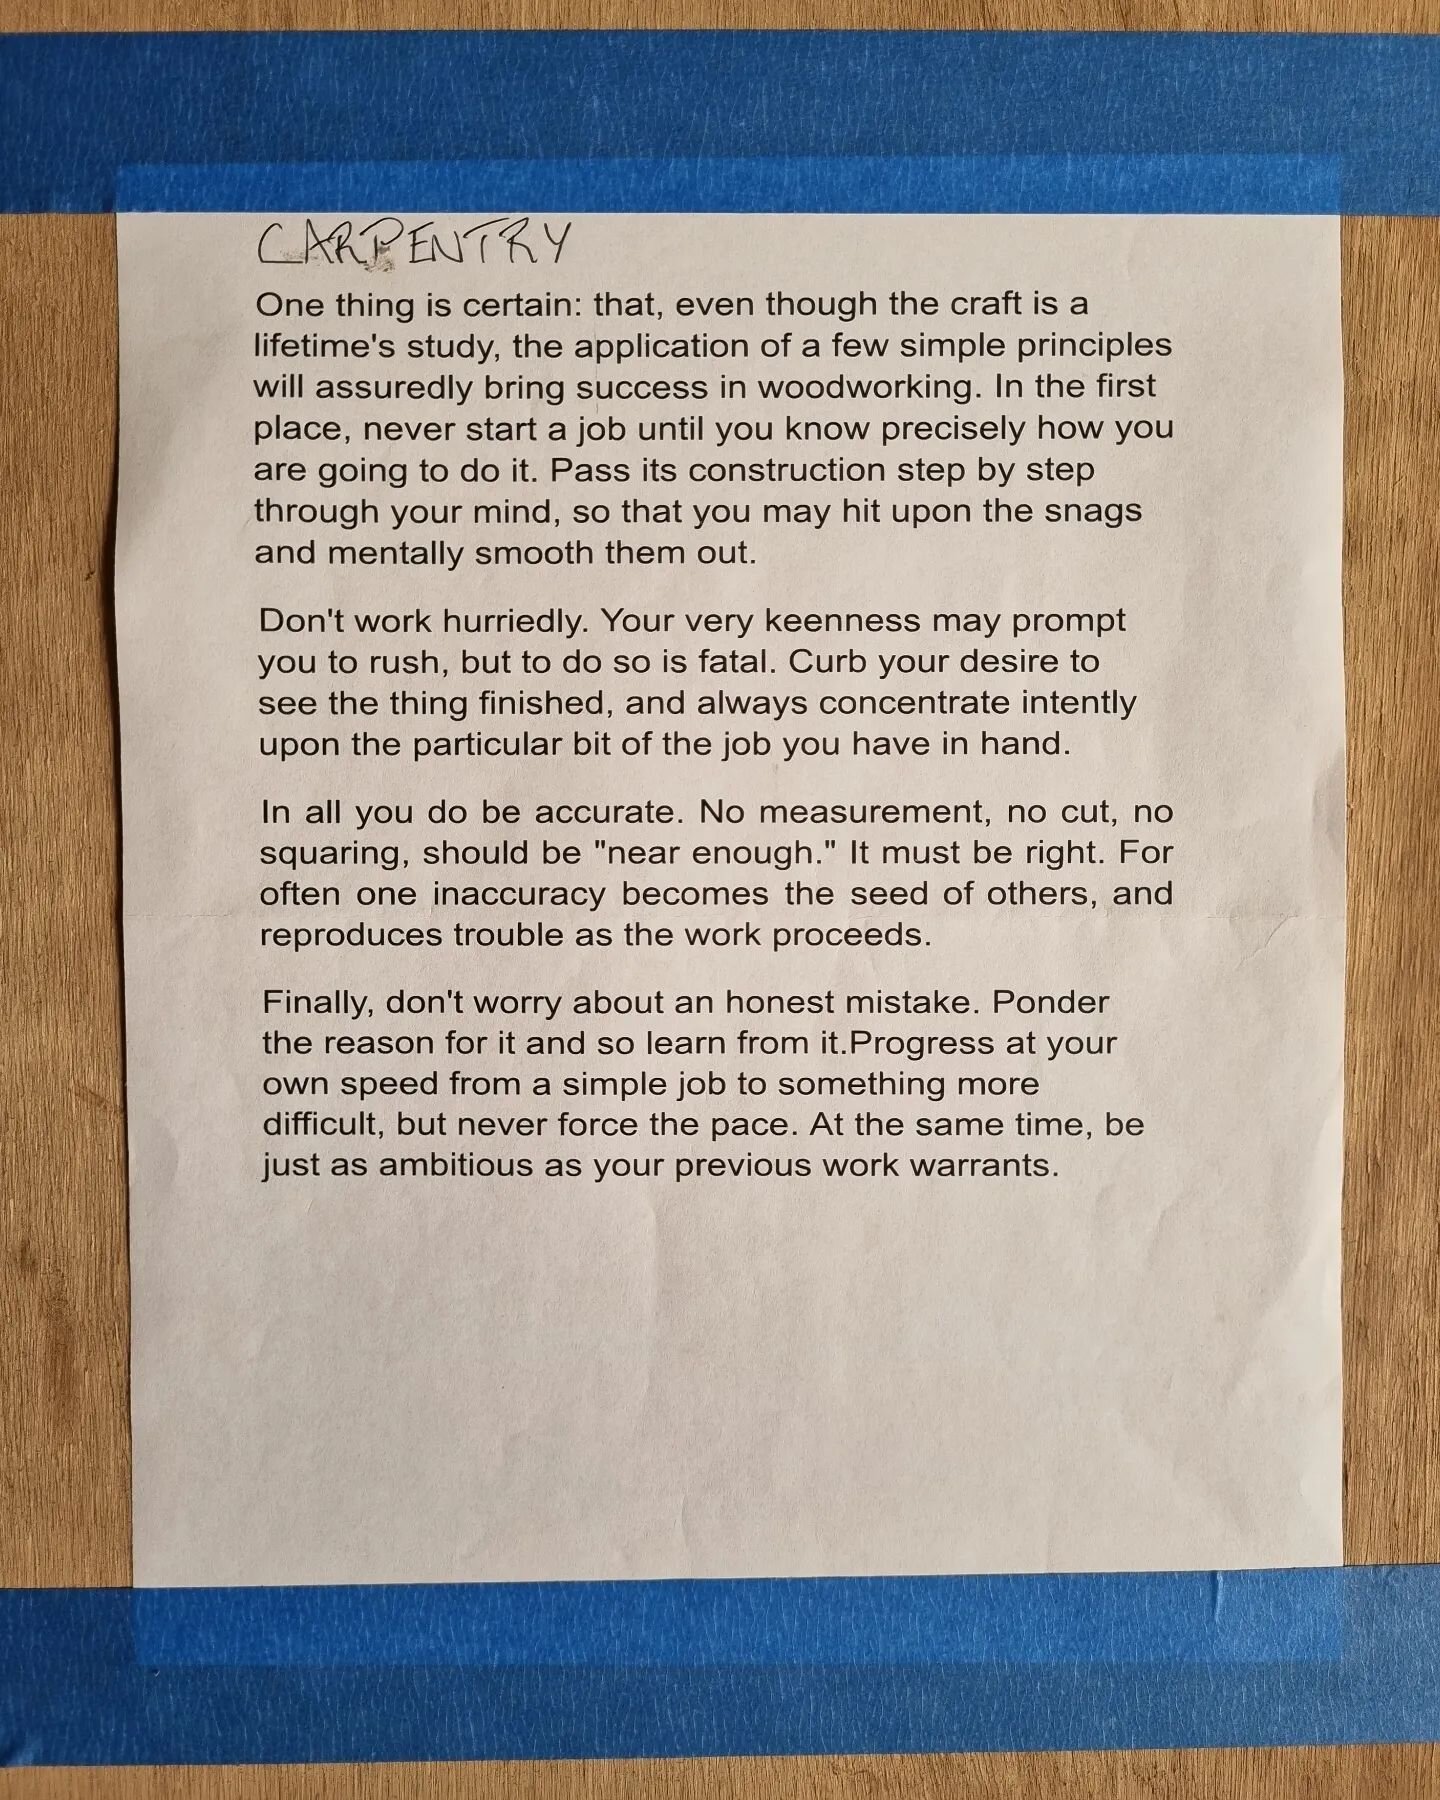 This says so much about the team of builders we are fortunate enough to have building our home. This bit of wisdom is stuck up on the wall amongst the sketches and construction details.

&quot;CARPENTRY
One thing is certain: that, even though the cra